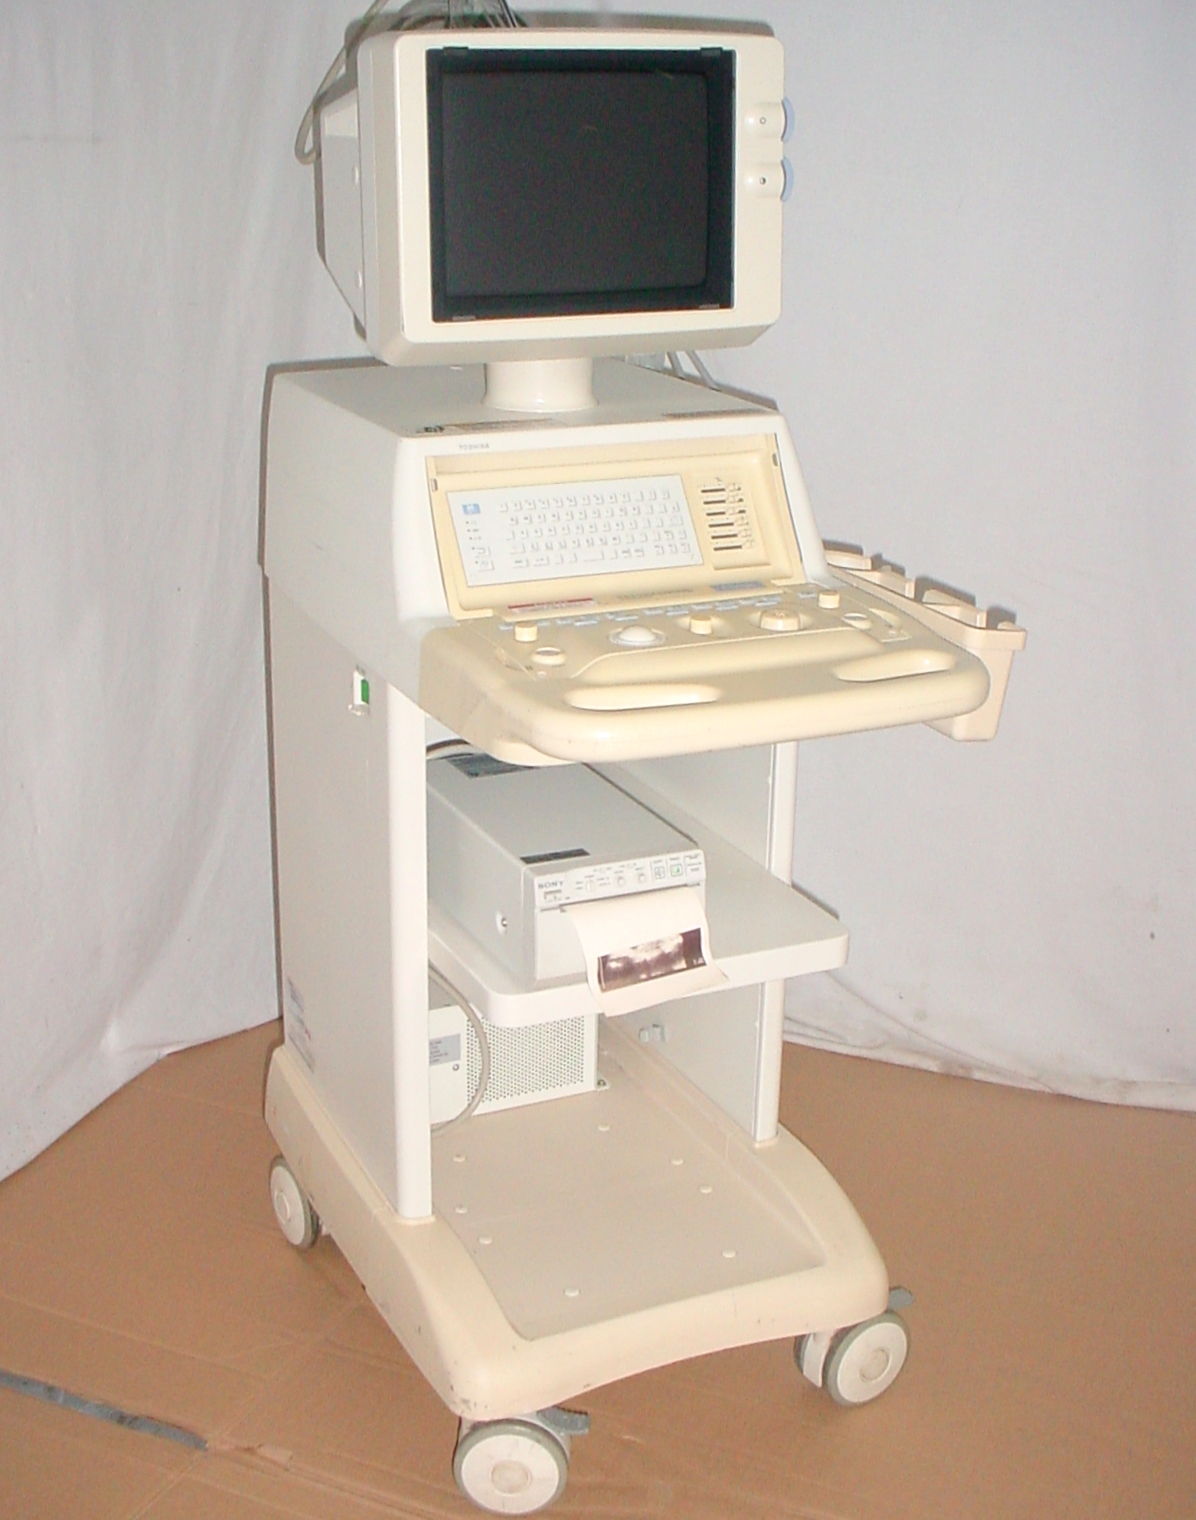 Toshiba Just Vision 400 SSA-325A Ultrasound w/ PVG-681S & PVF-745V Fetal Probes DIAGNOSTIC ULTRASOUND MACHINES FOR SALE